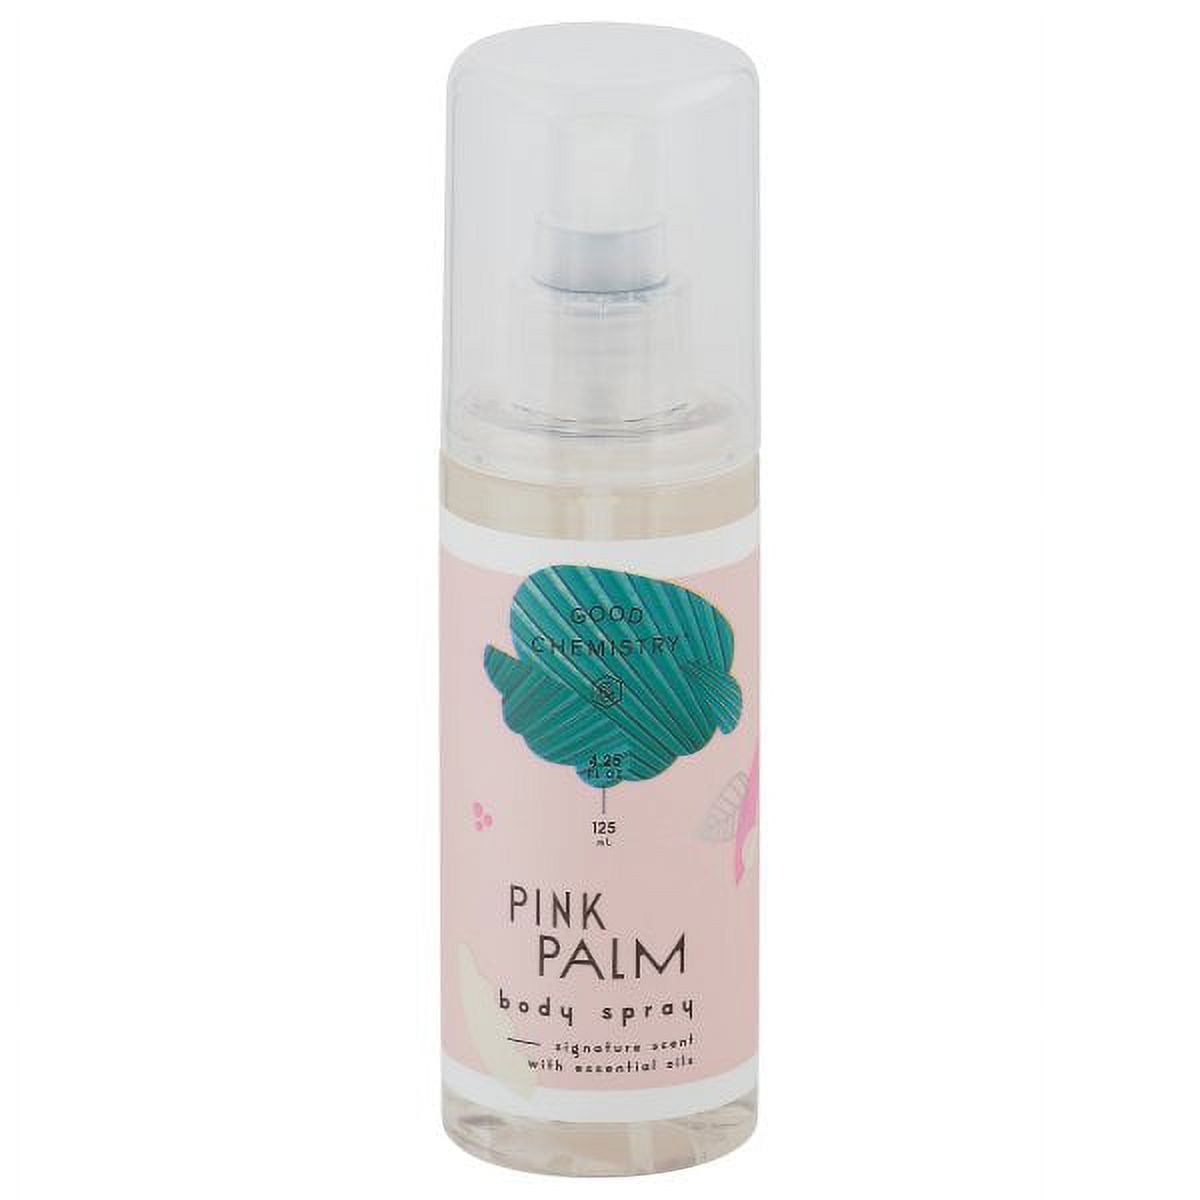  I am ME Eau de Parfum - Clean Naturally Scented Womens Perfumes  - A Dynamic Blend of Sweet Apple, Melon, and Amyris with Floral Notes of  Jasmine, Cyclamen, and Tiara